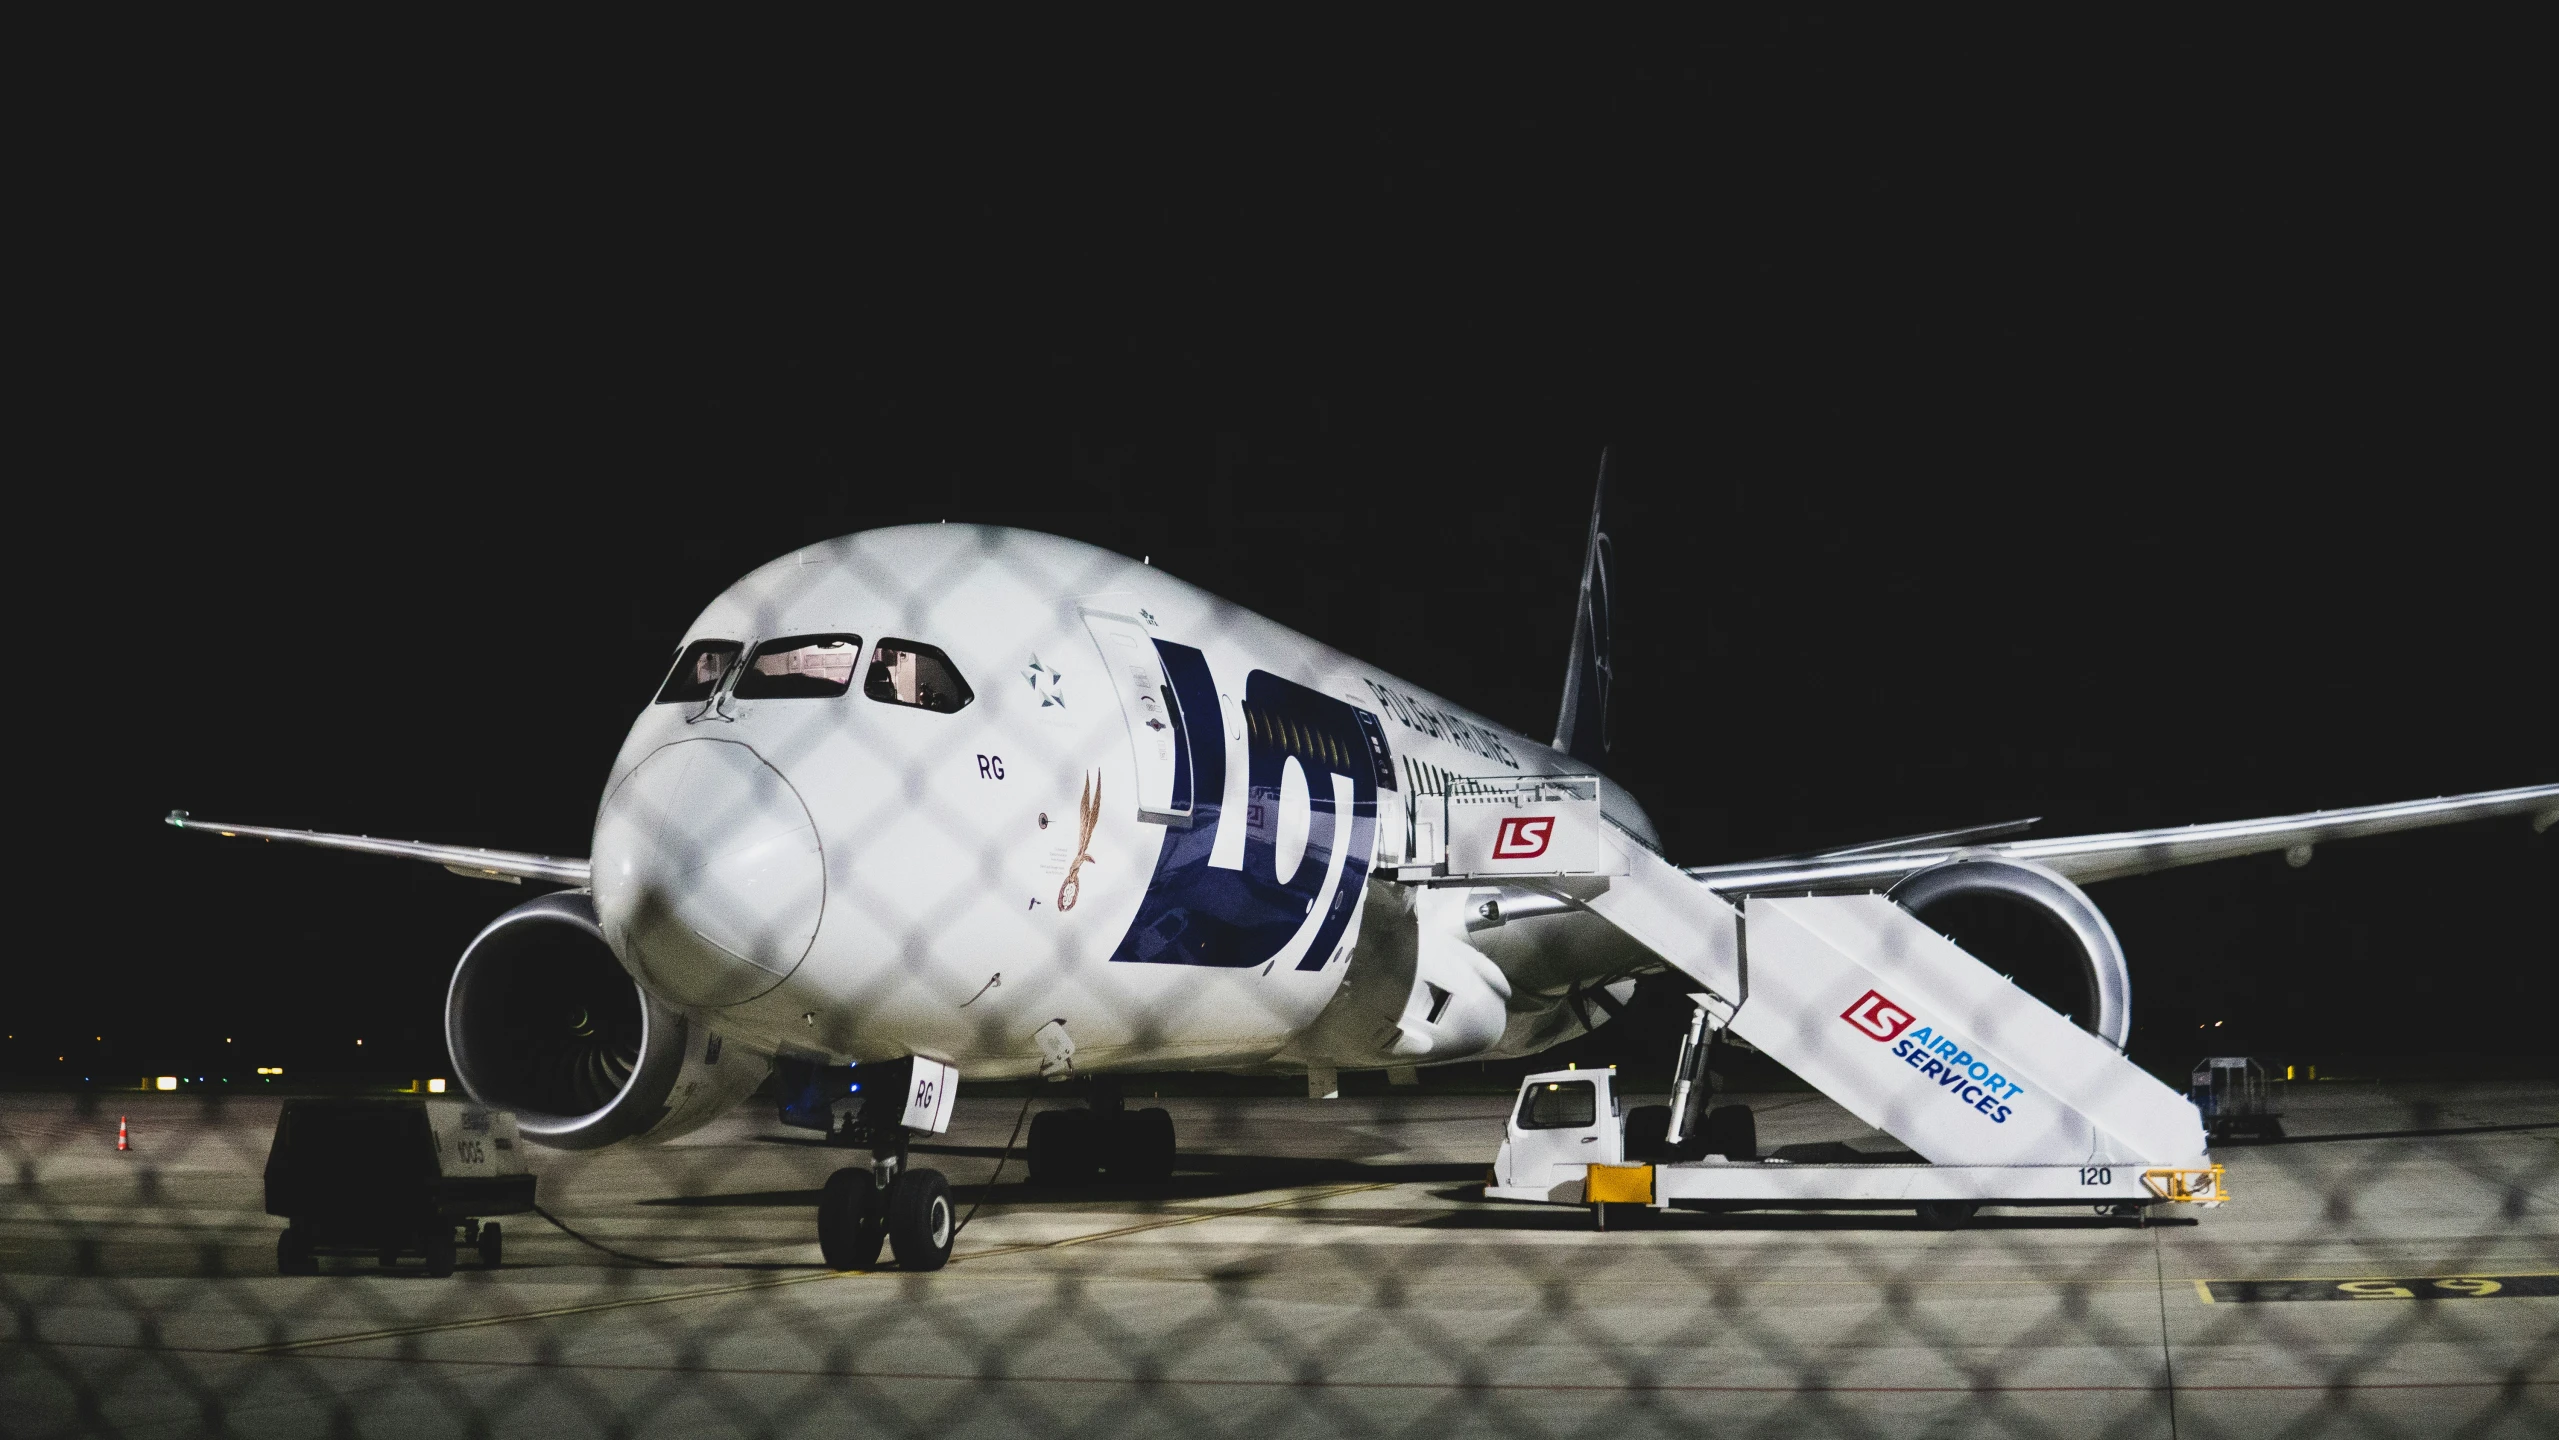 a commercial airliner parked on the tarmac at night